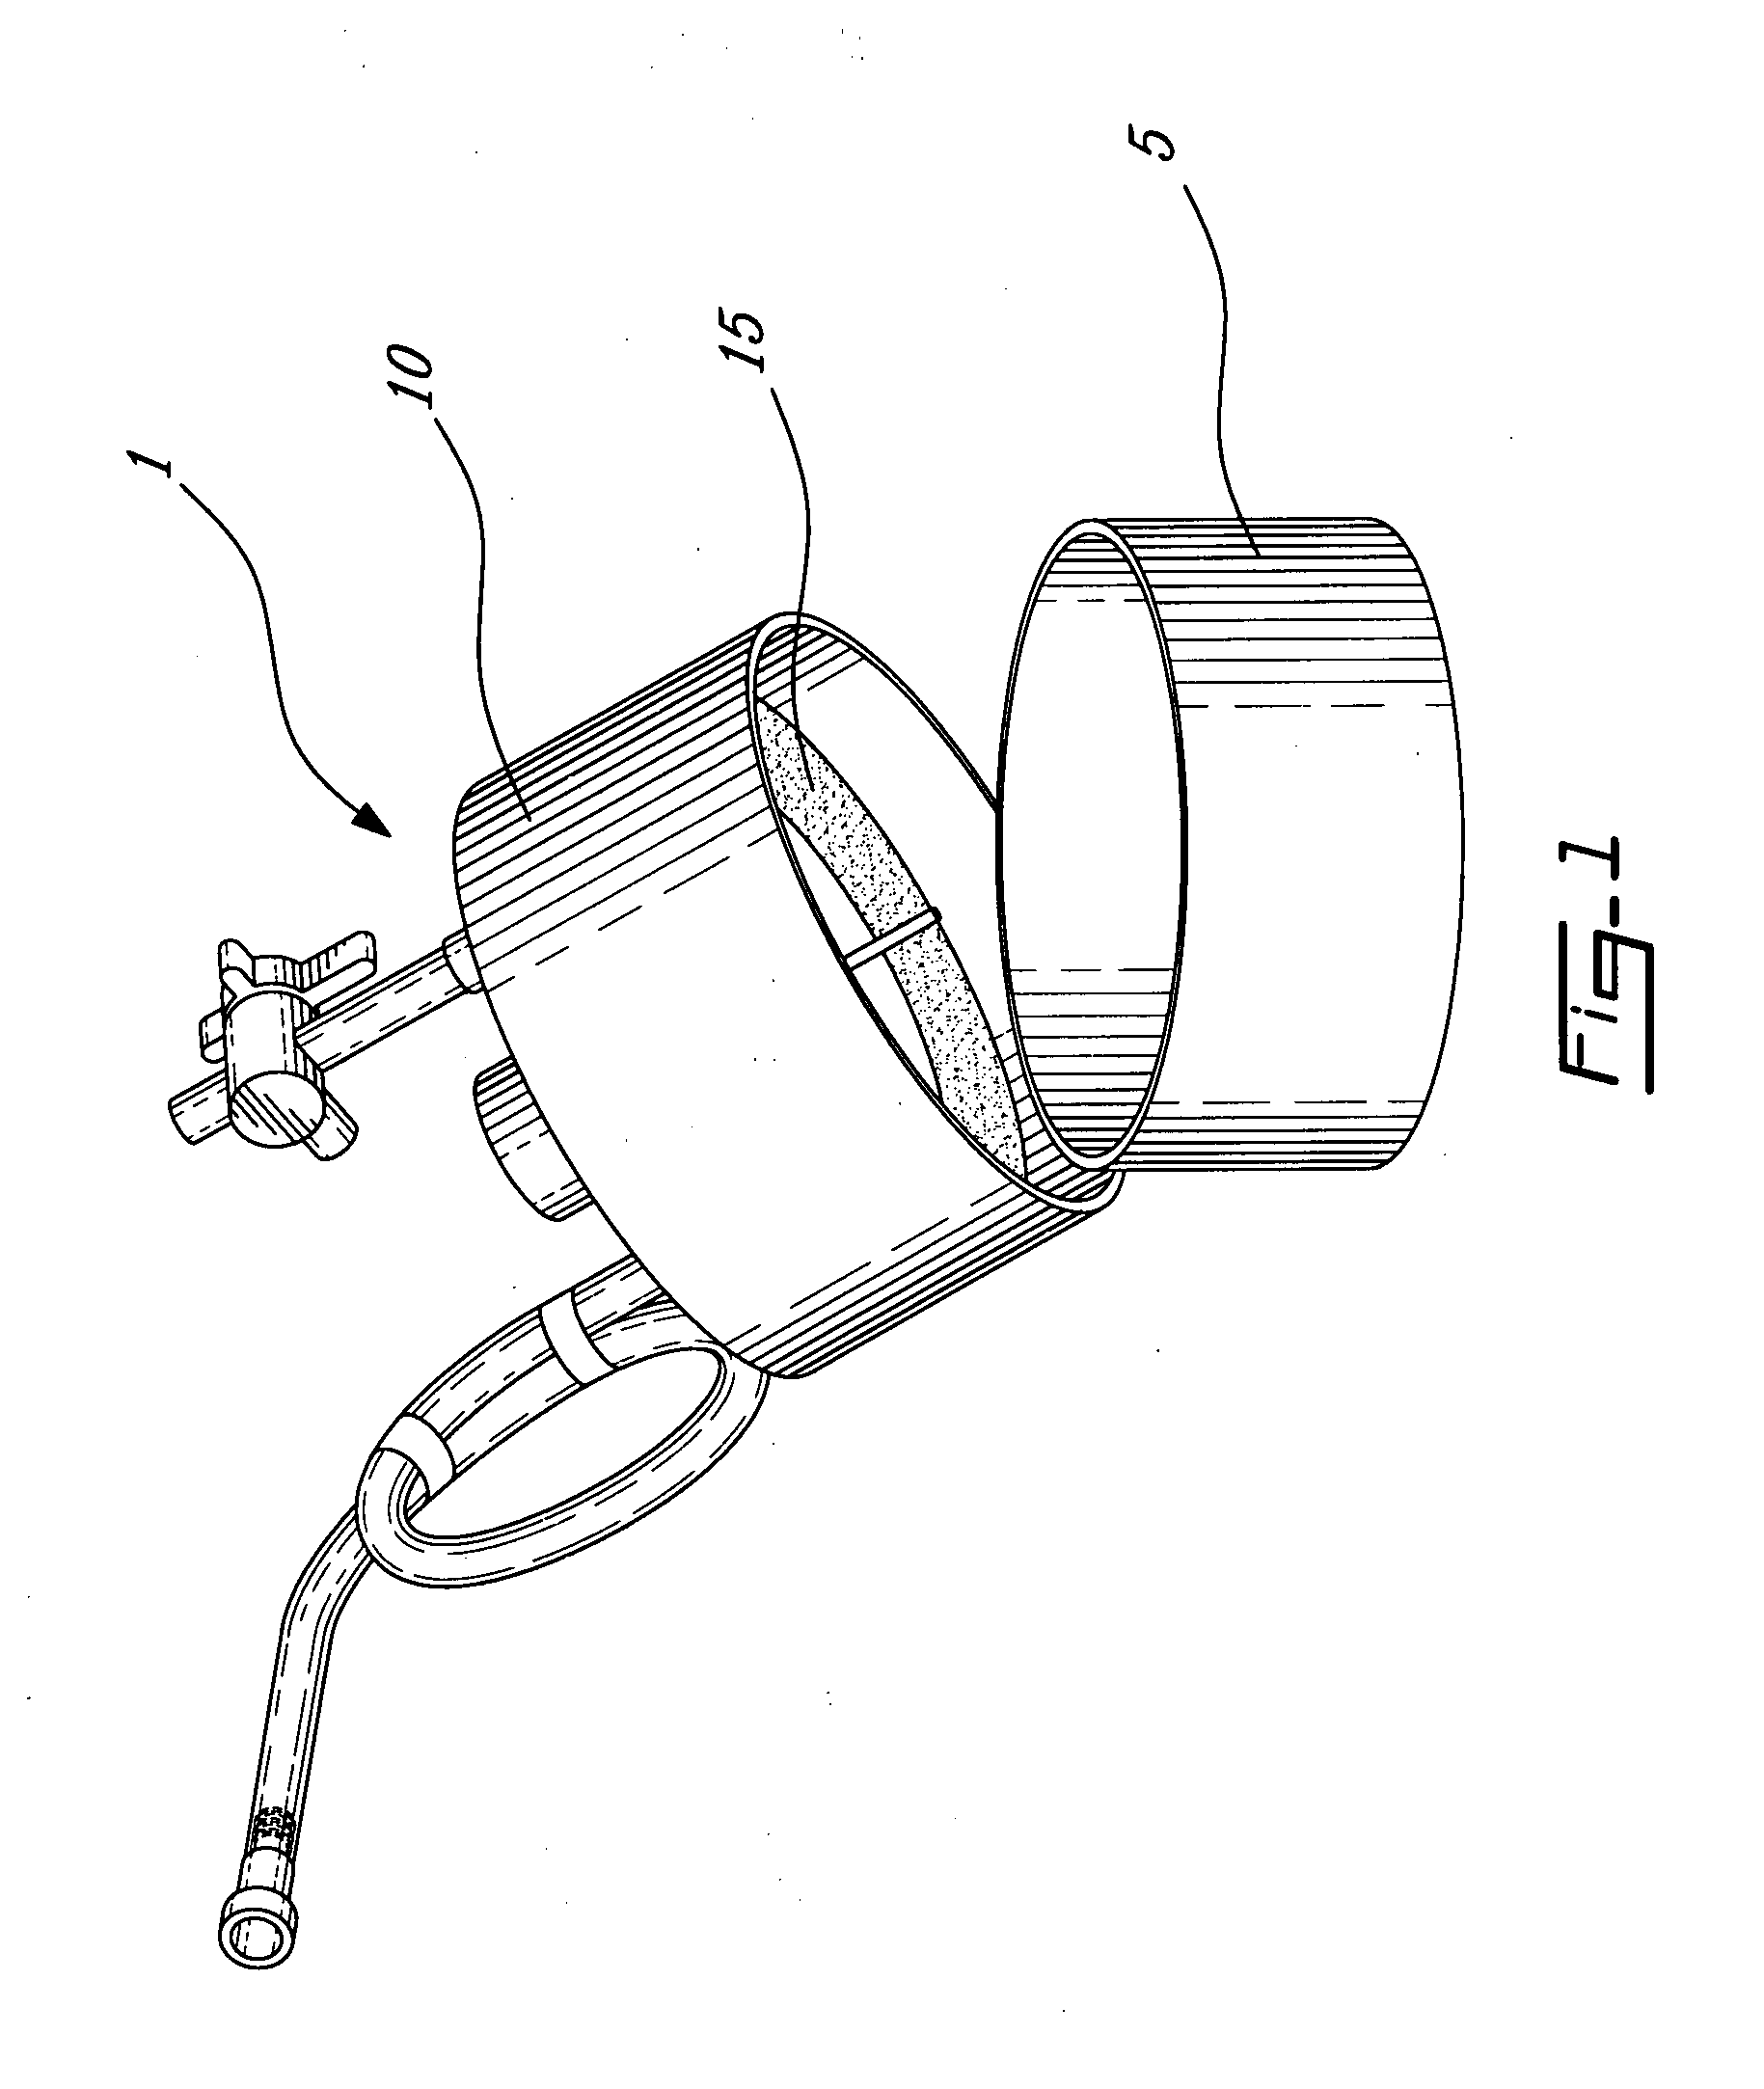 Apparatus and method for measuring the surface flux of a soil gas component